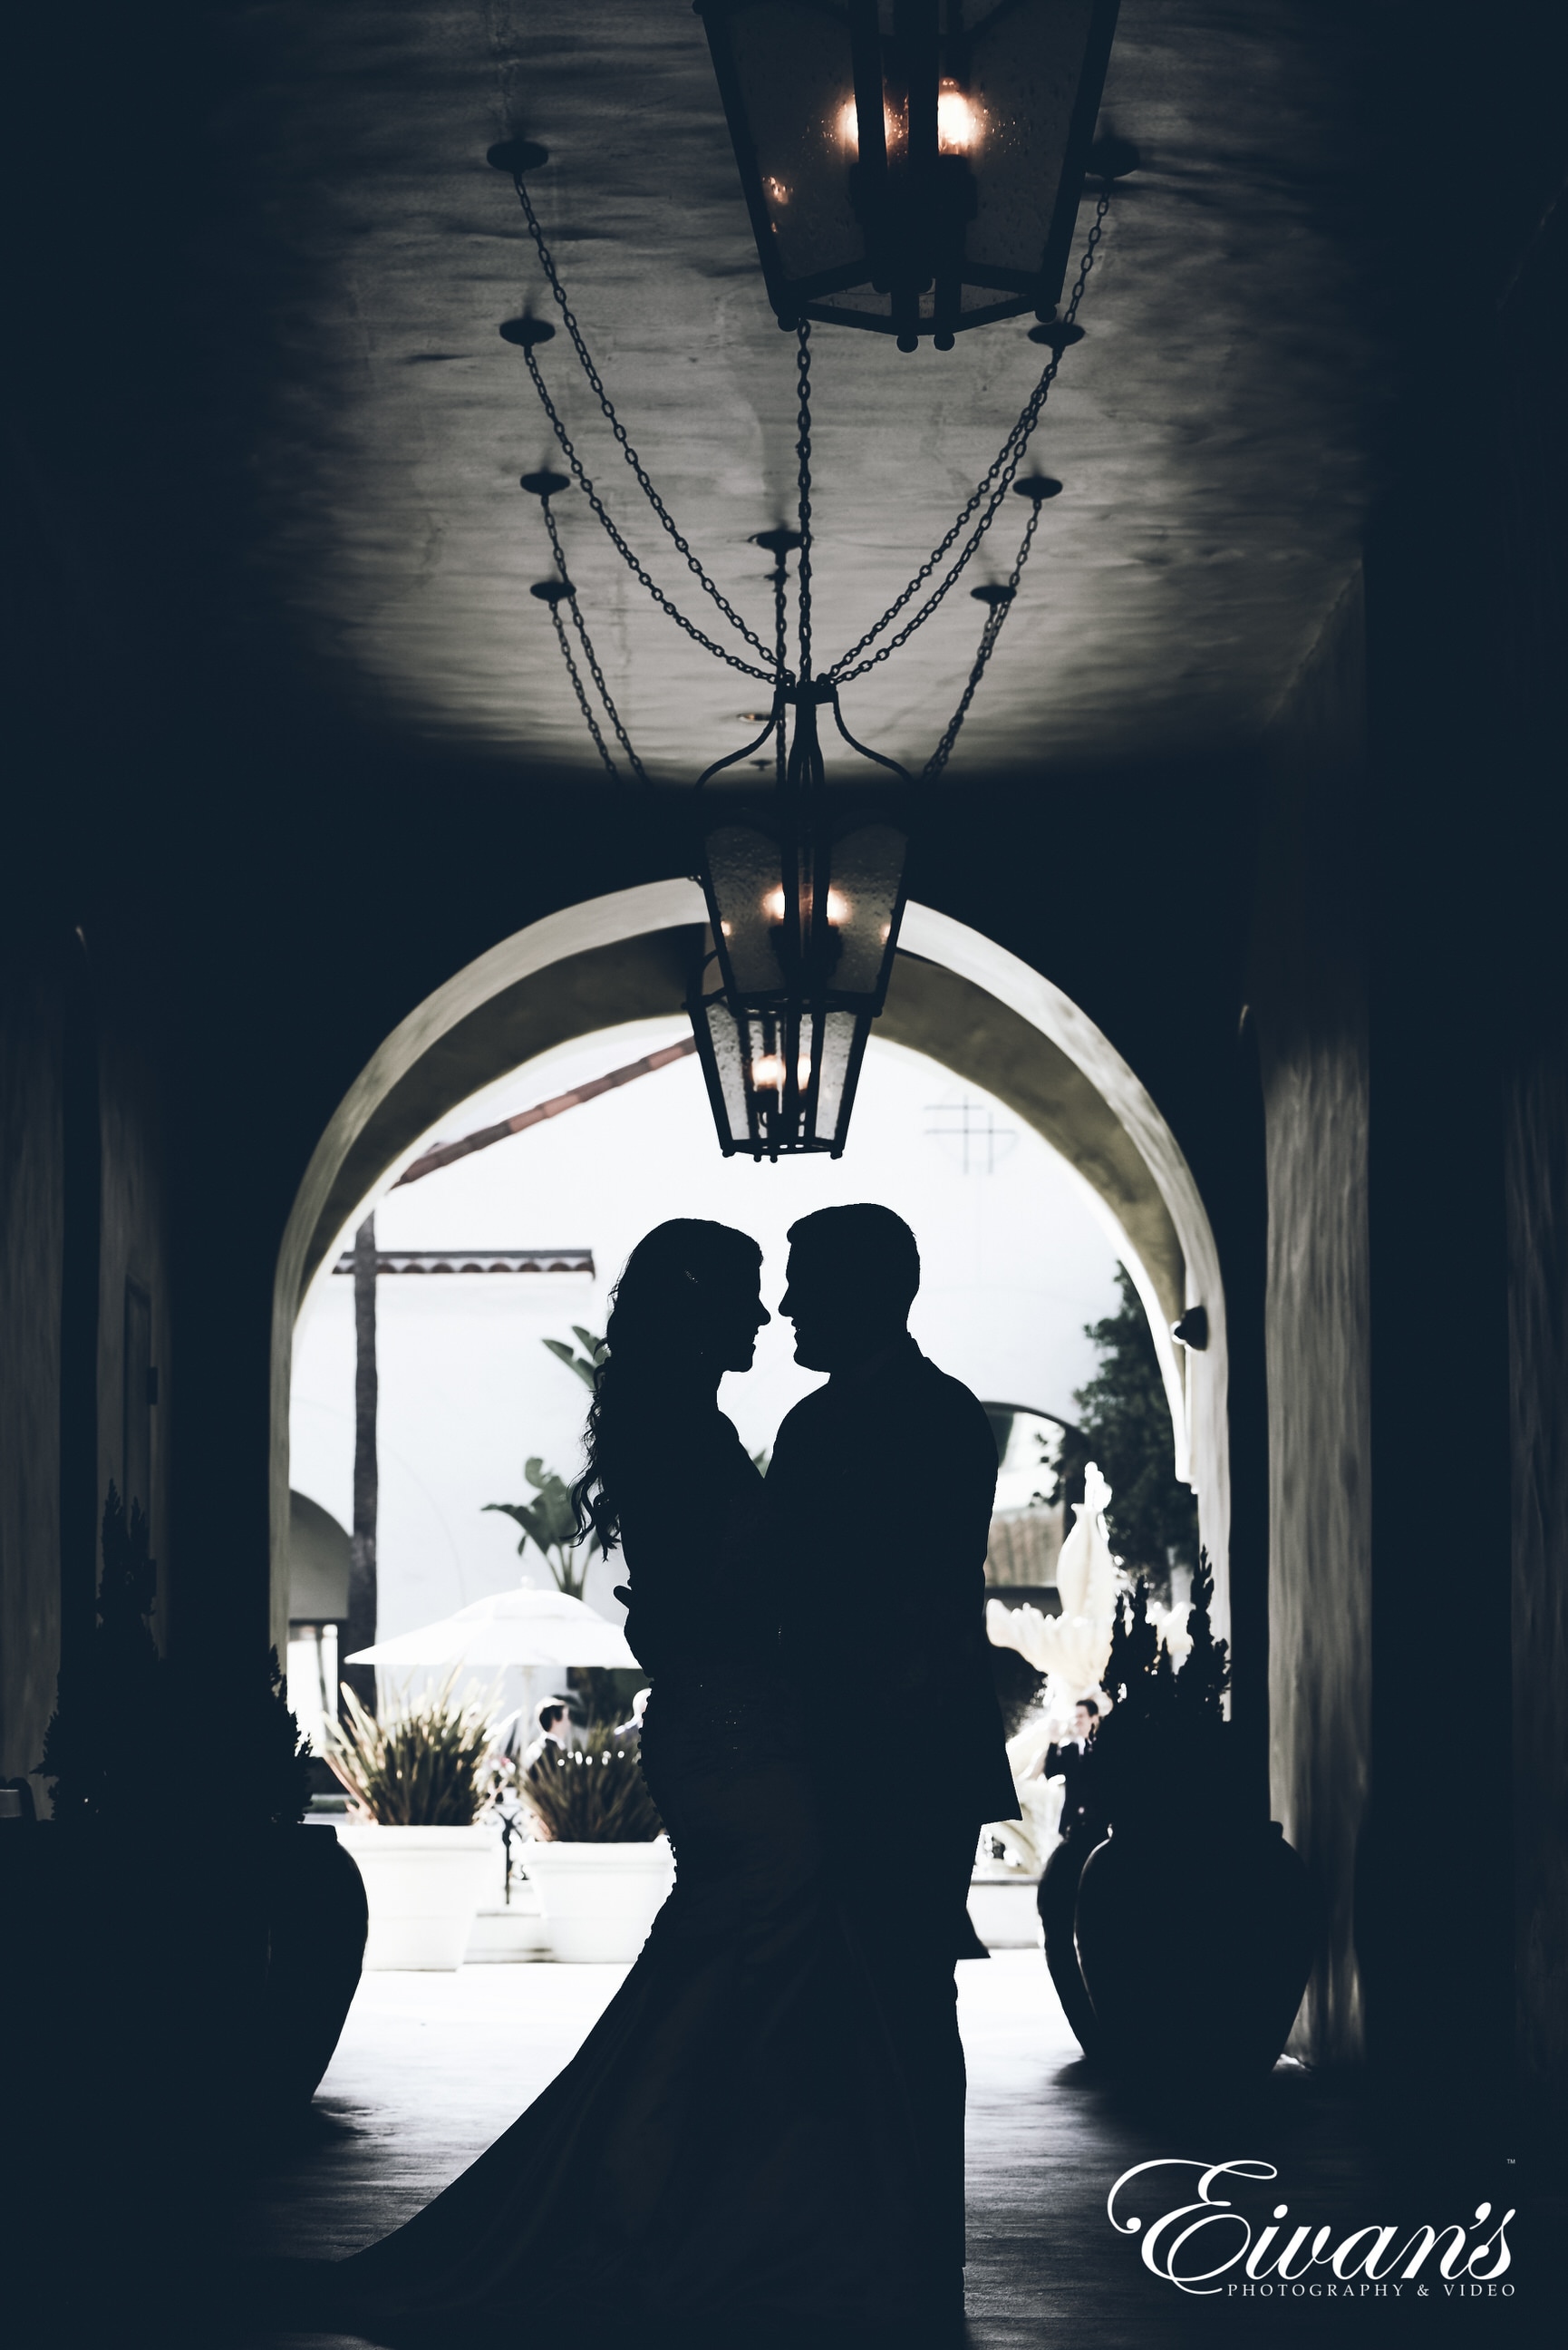 silhouette style picture of man and woman hugging